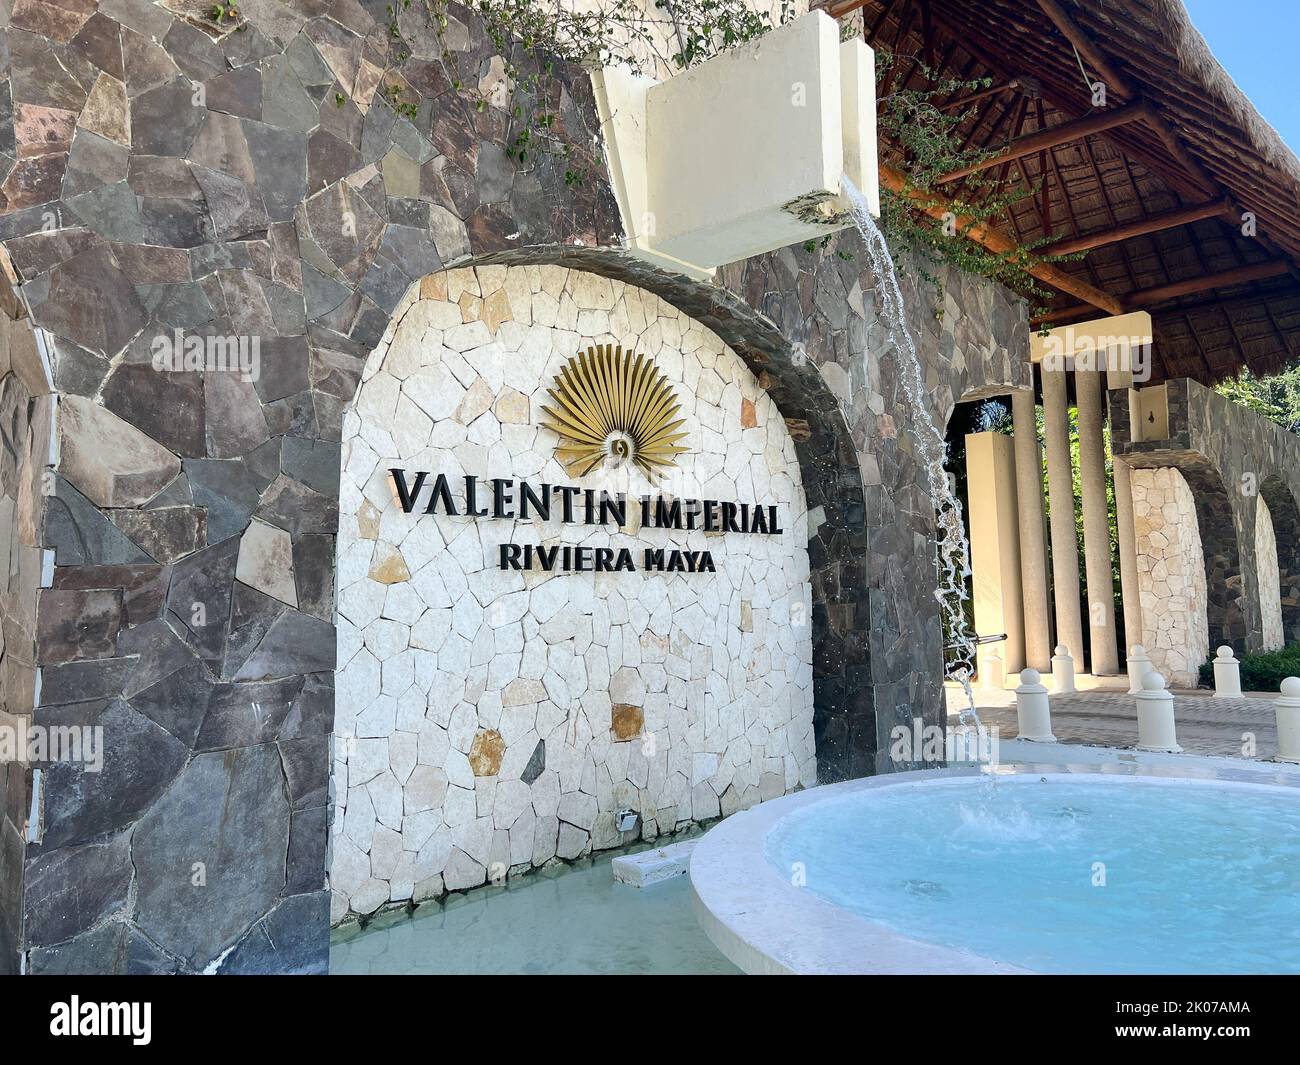 Valentin Imperial Riviera Maya is an 5 star all-inclusive luxury resort. Stock Photo